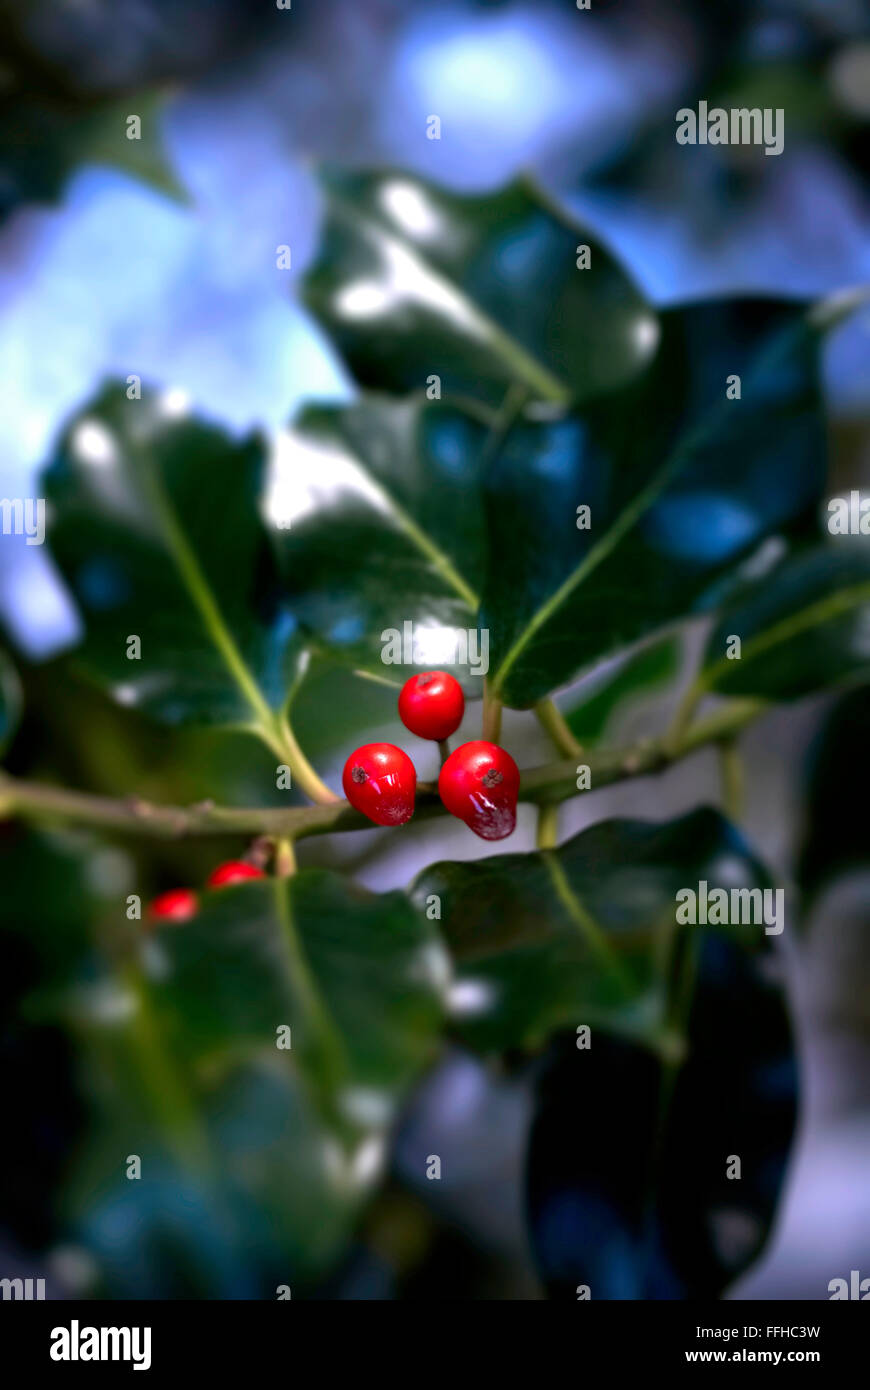 Frozen Holly Berries Stock Photo